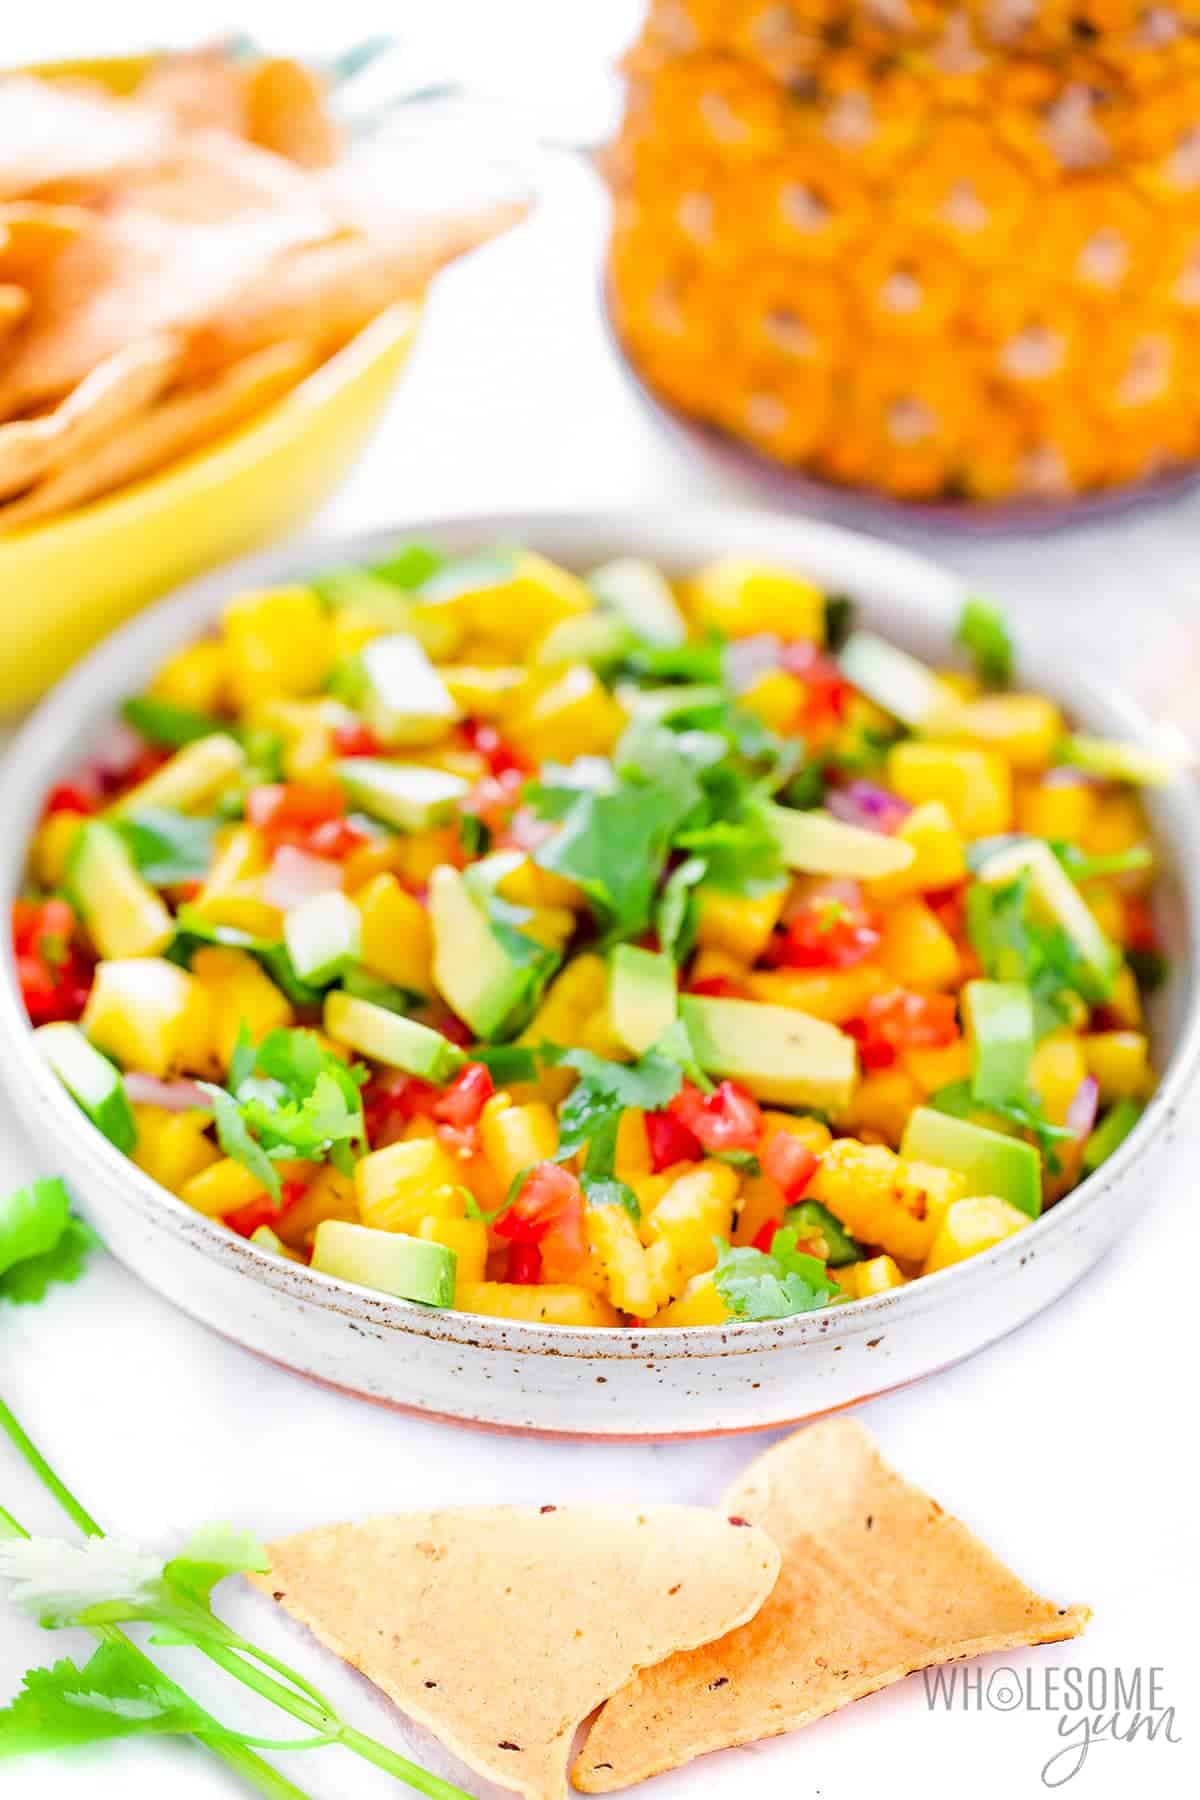 Next to the pineapple salad recipe is fries and fresh pineapple.